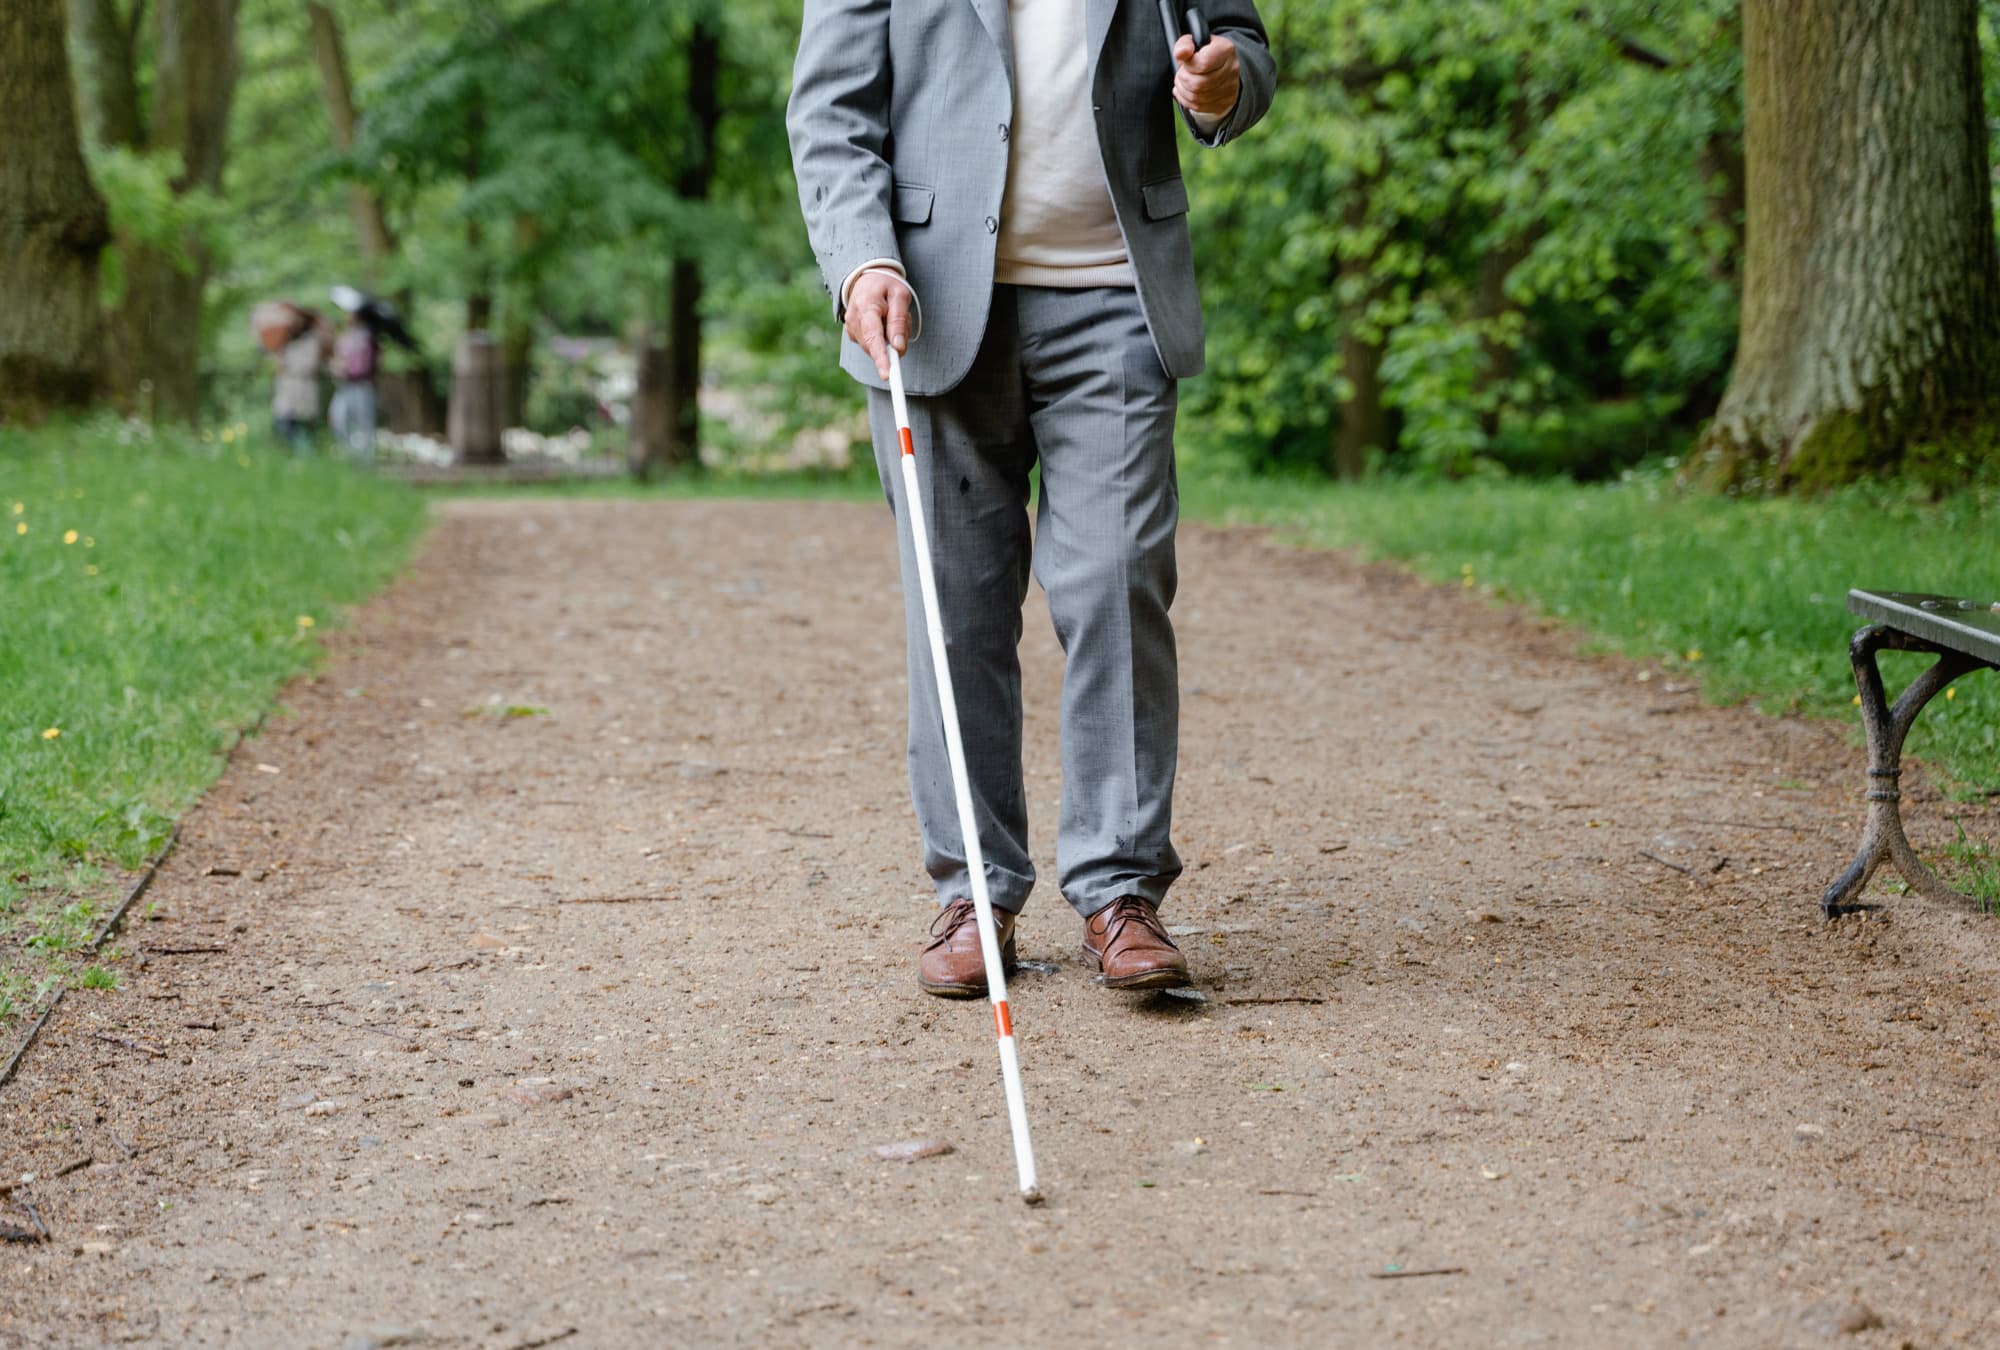 A person who is blind or has low vision walking around a park with his white cane